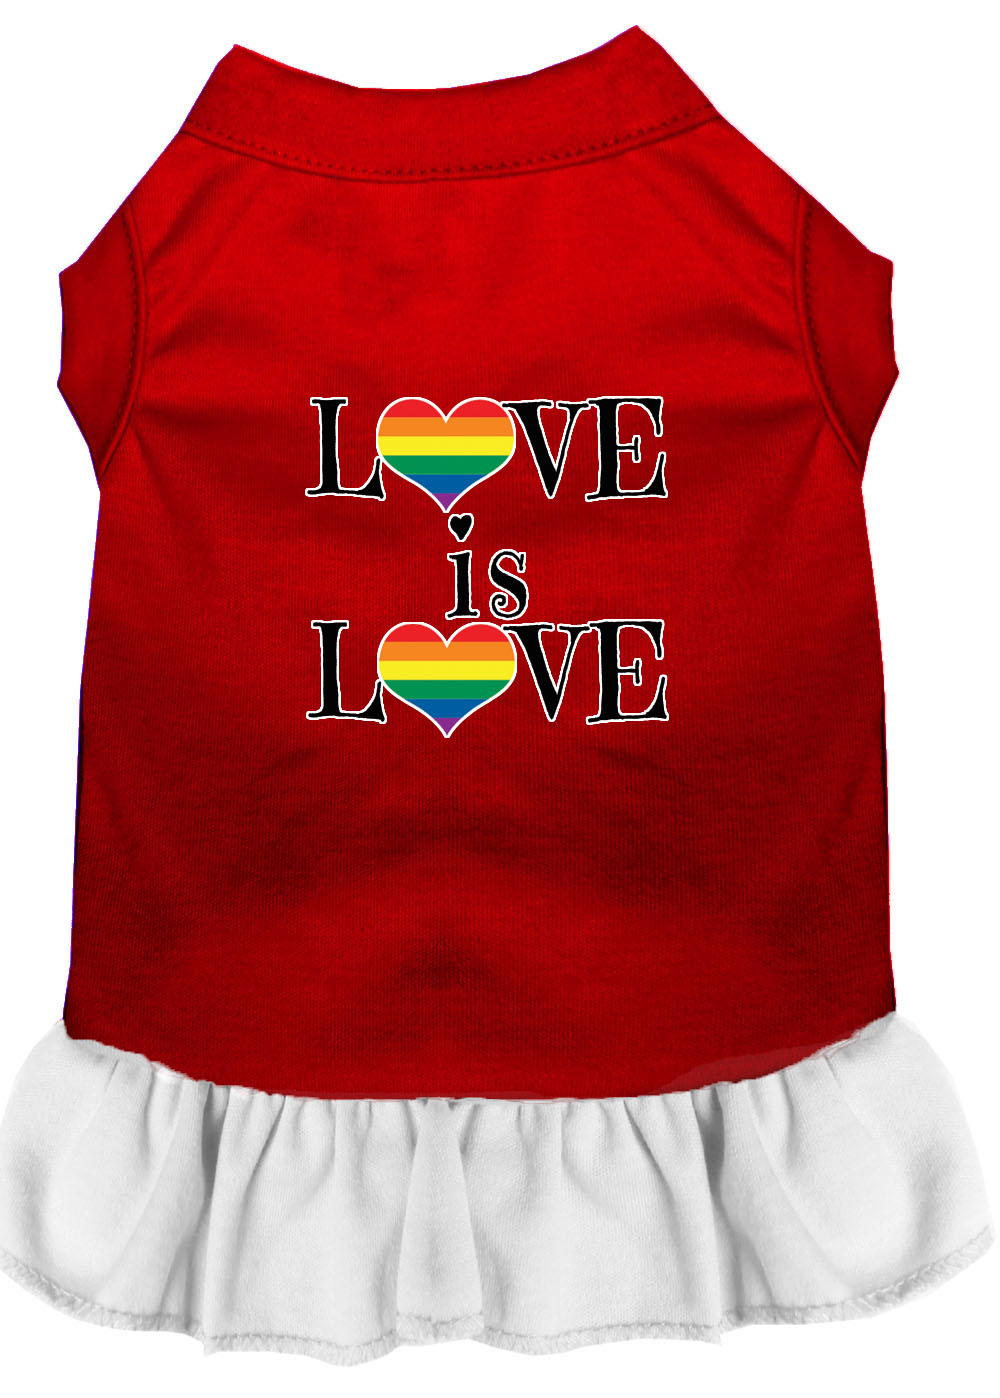 Love is Love Screen Print Dog Dress Red with White Sm